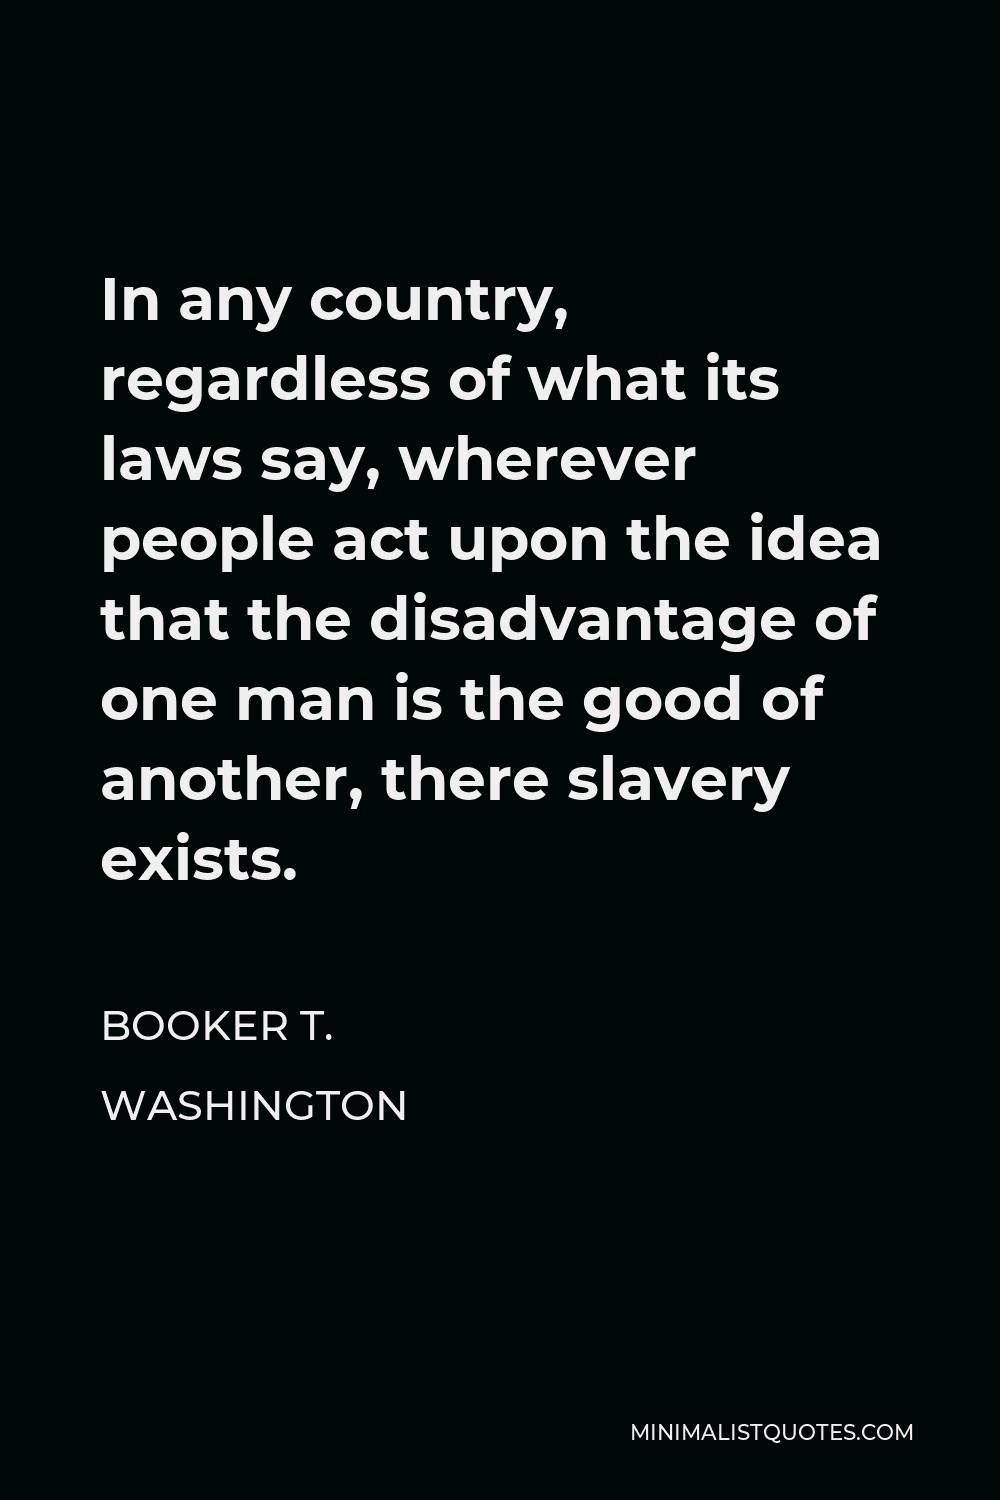 Booker T. Washington Quote - In any country, regardless of what its laws say, wherever people act upon the idea that the disadvantage of one man is the good of another, there slavery exists.